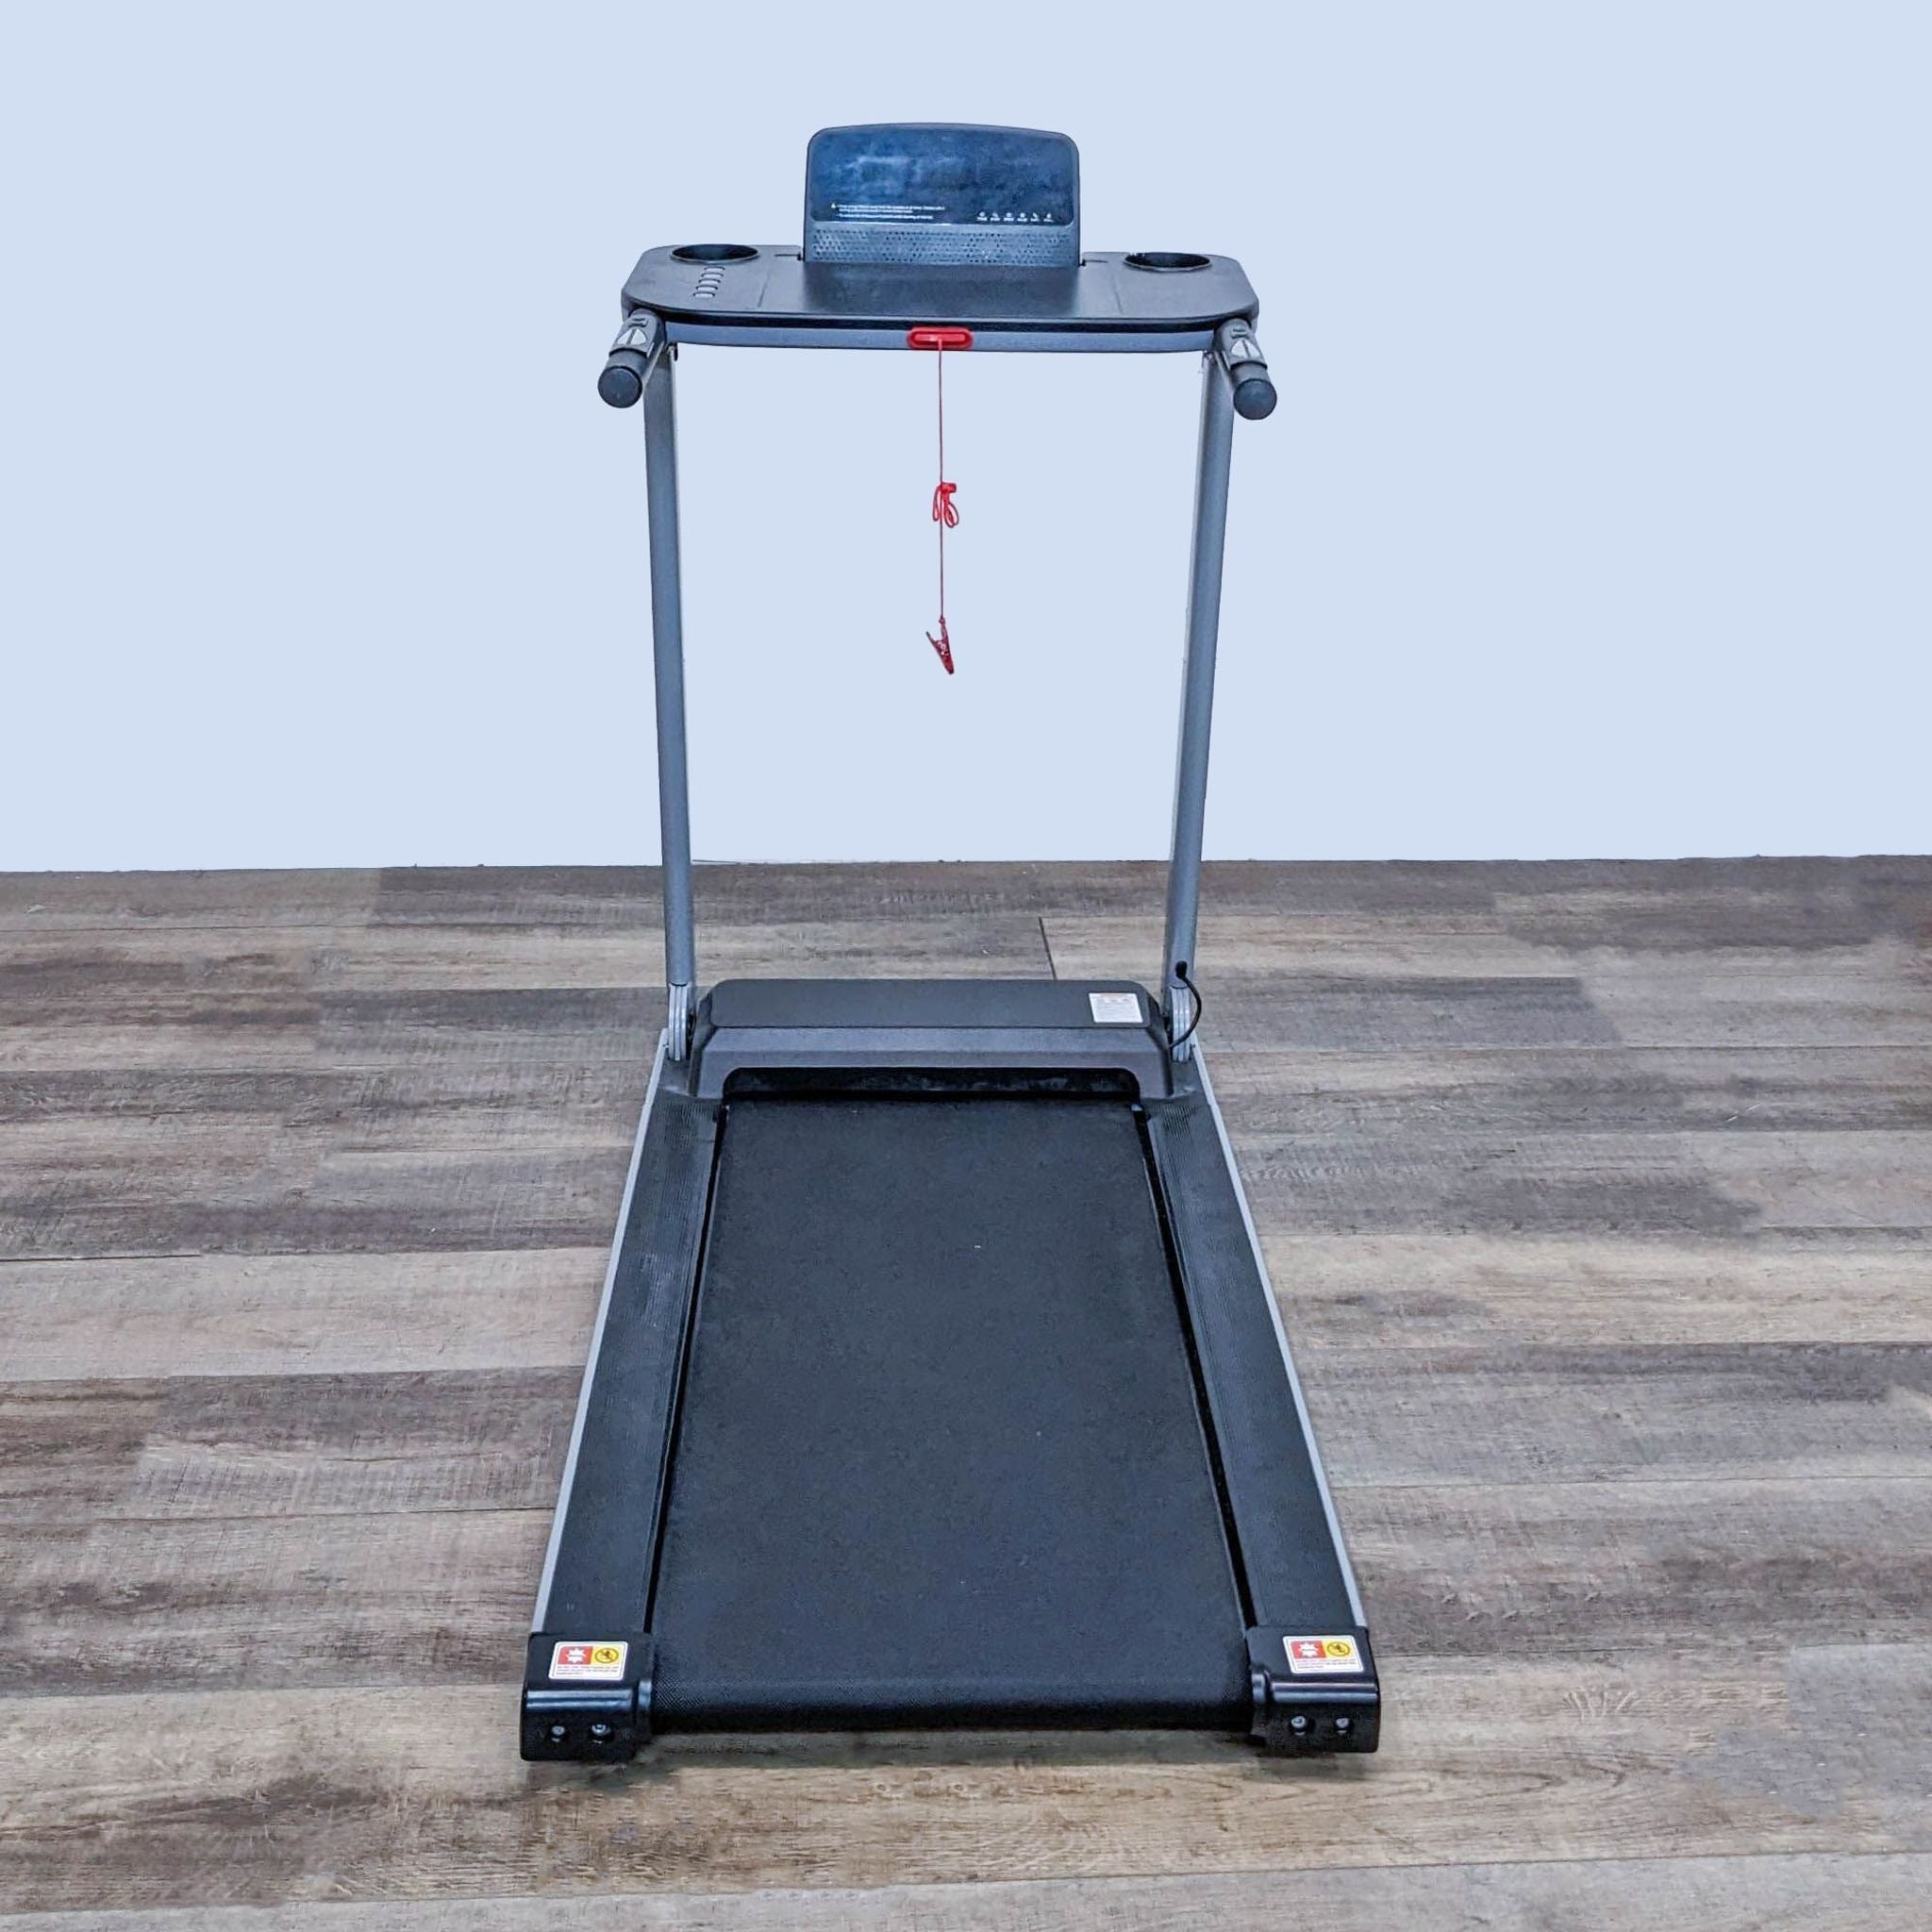 Front view of a Funmily treadmill with a black belt, metal frame, and attached LCD monitor on wooden flooring.